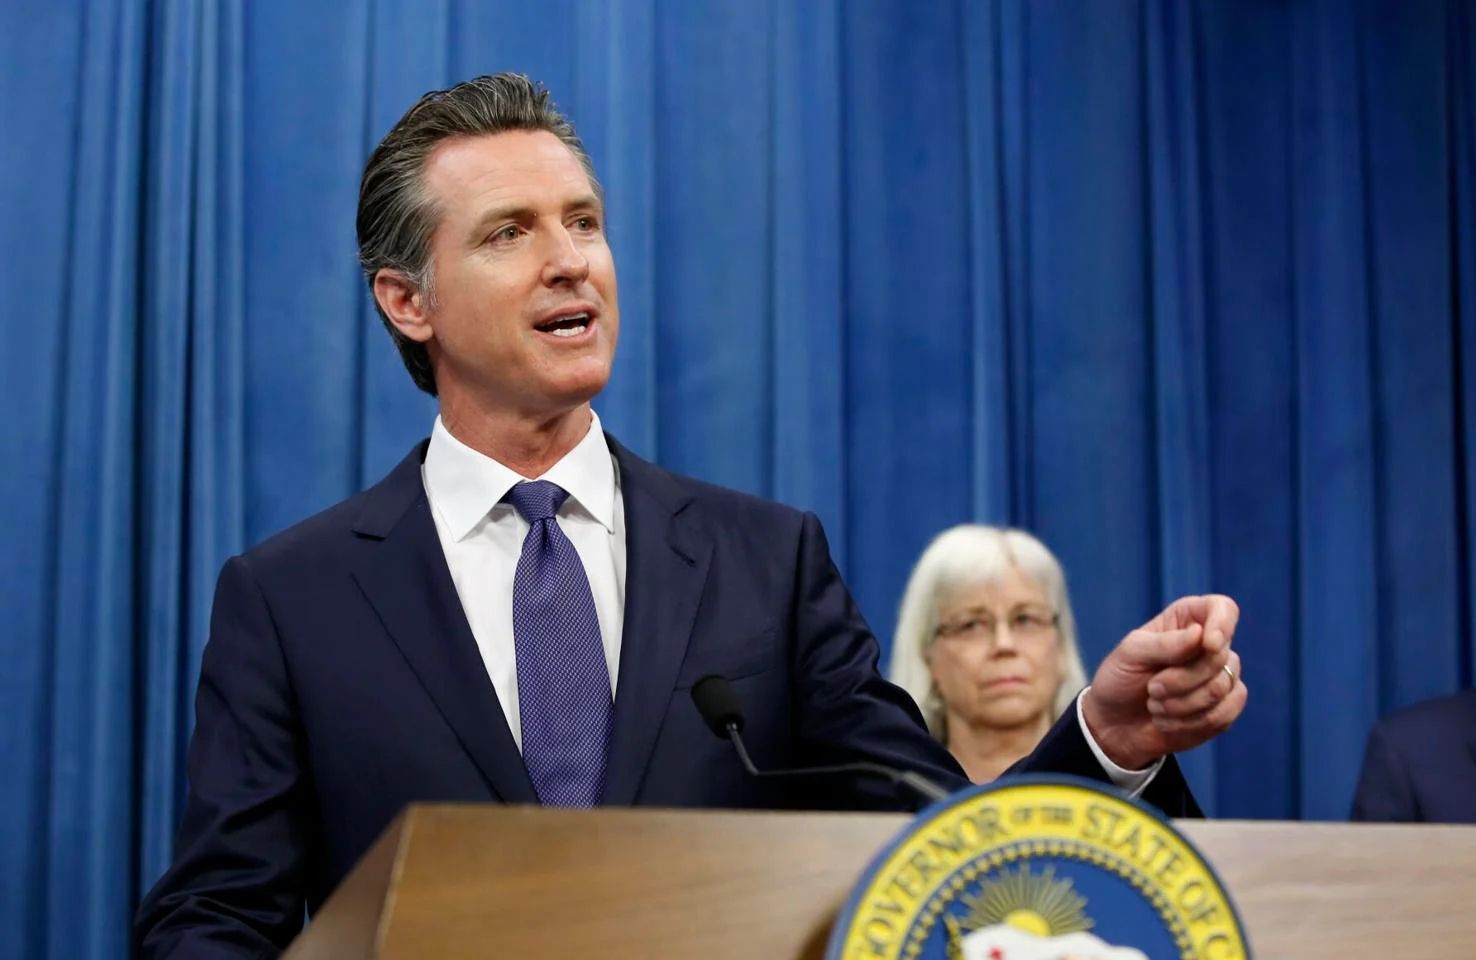 Texas pastors offer blistering rebuke of Newsom’s ad quoting Jesus to promote abortion